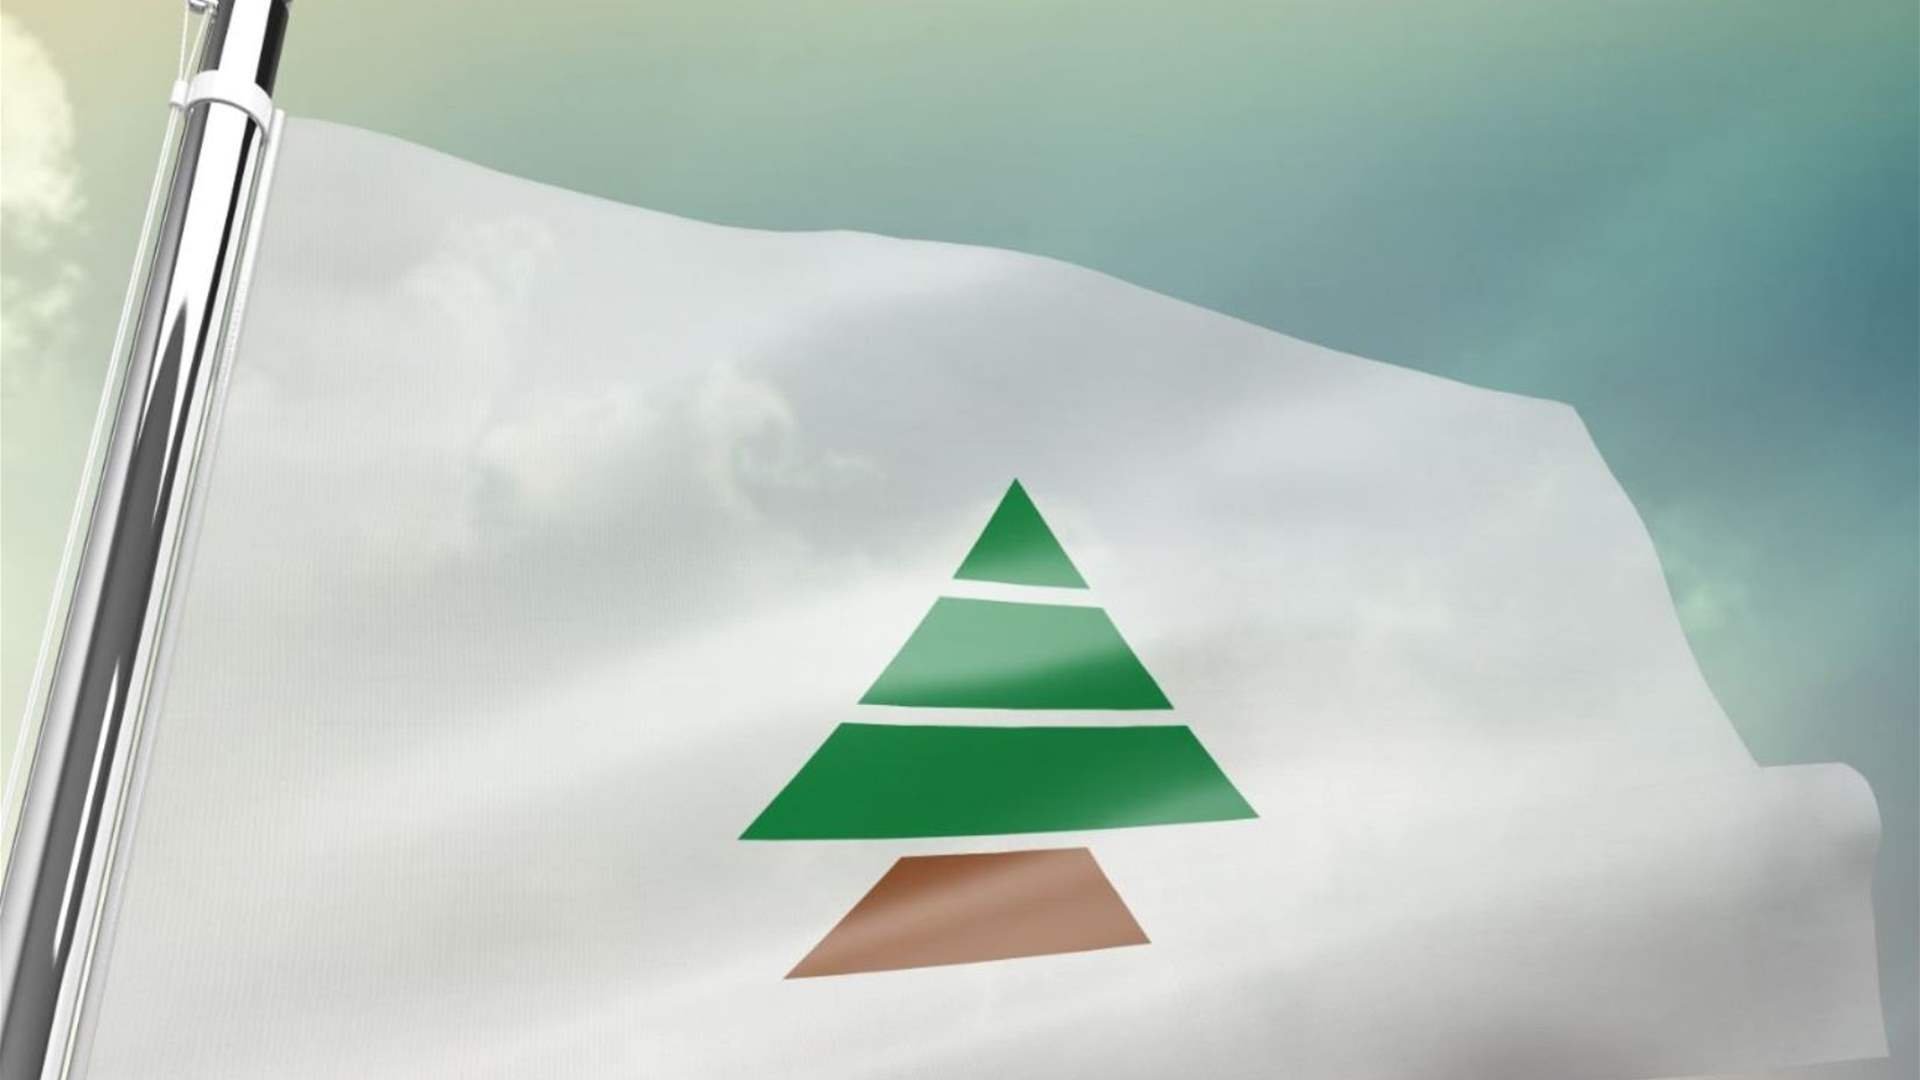 Kataeb Party condemns Hezbollah&#39;s grip on southern Lebanon, urges sovereign forces to unite